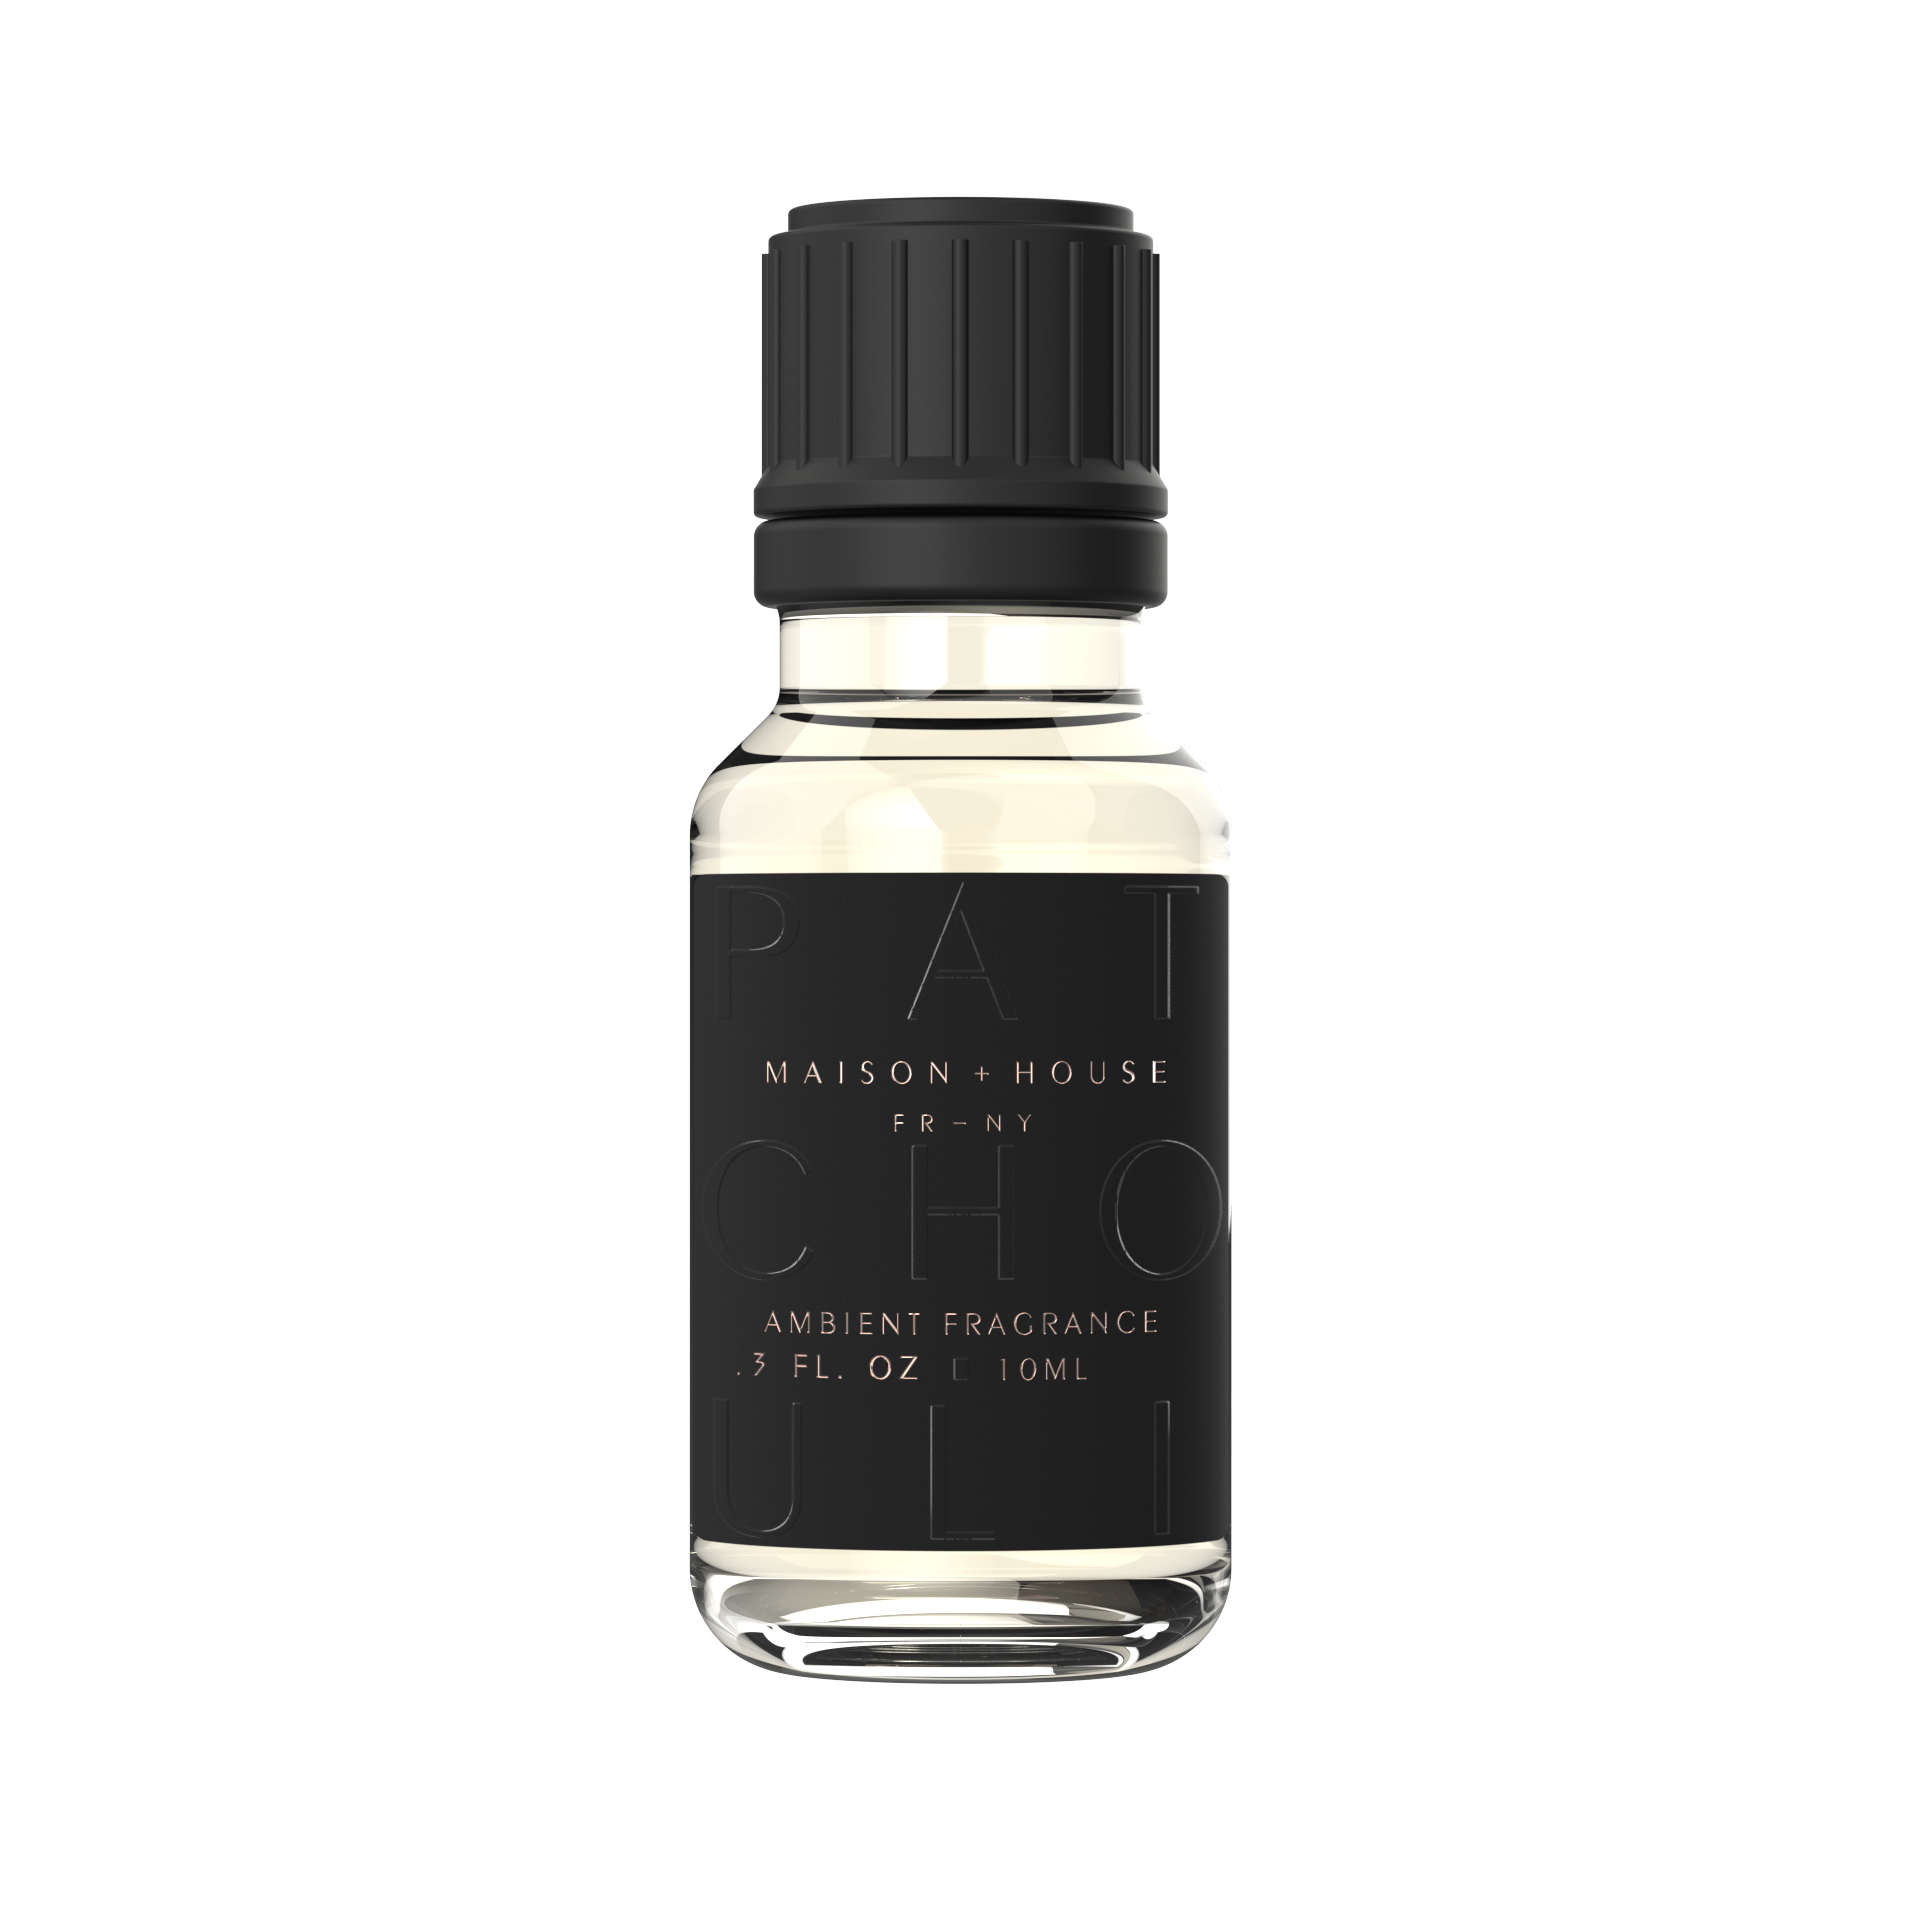 Maison+House Patchouli French Ambient Fragrance